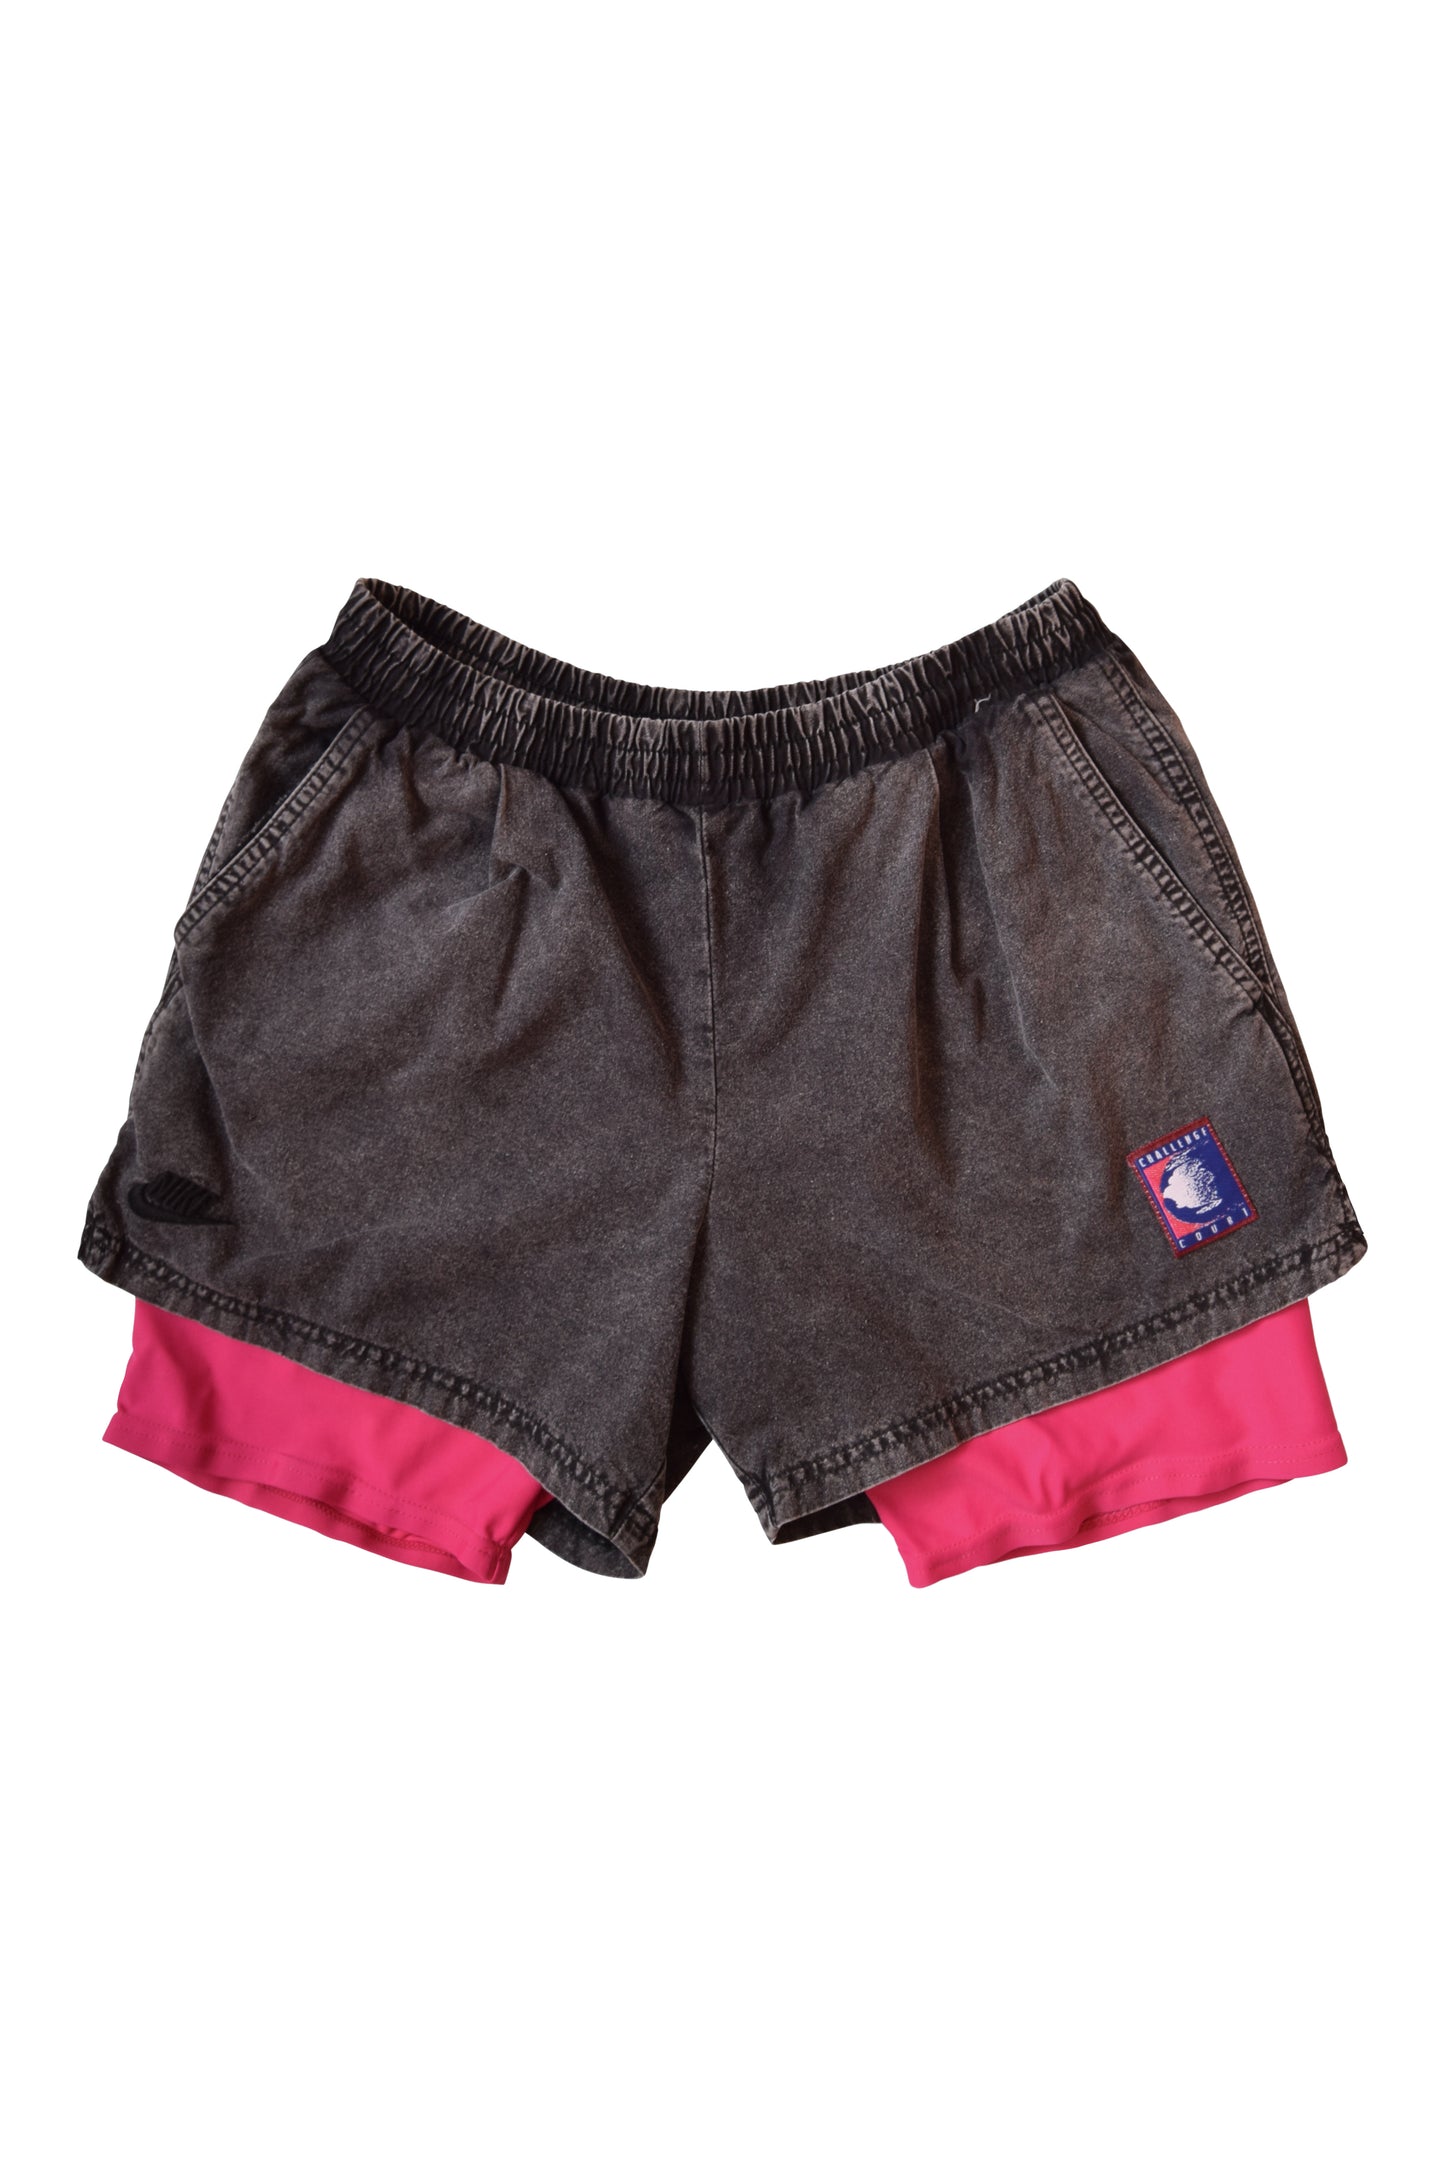 NIKE CHALLENGE COURT SHORTS ACID WASHED WITH LEGGINS ATTACHED ANDRE AGASSI